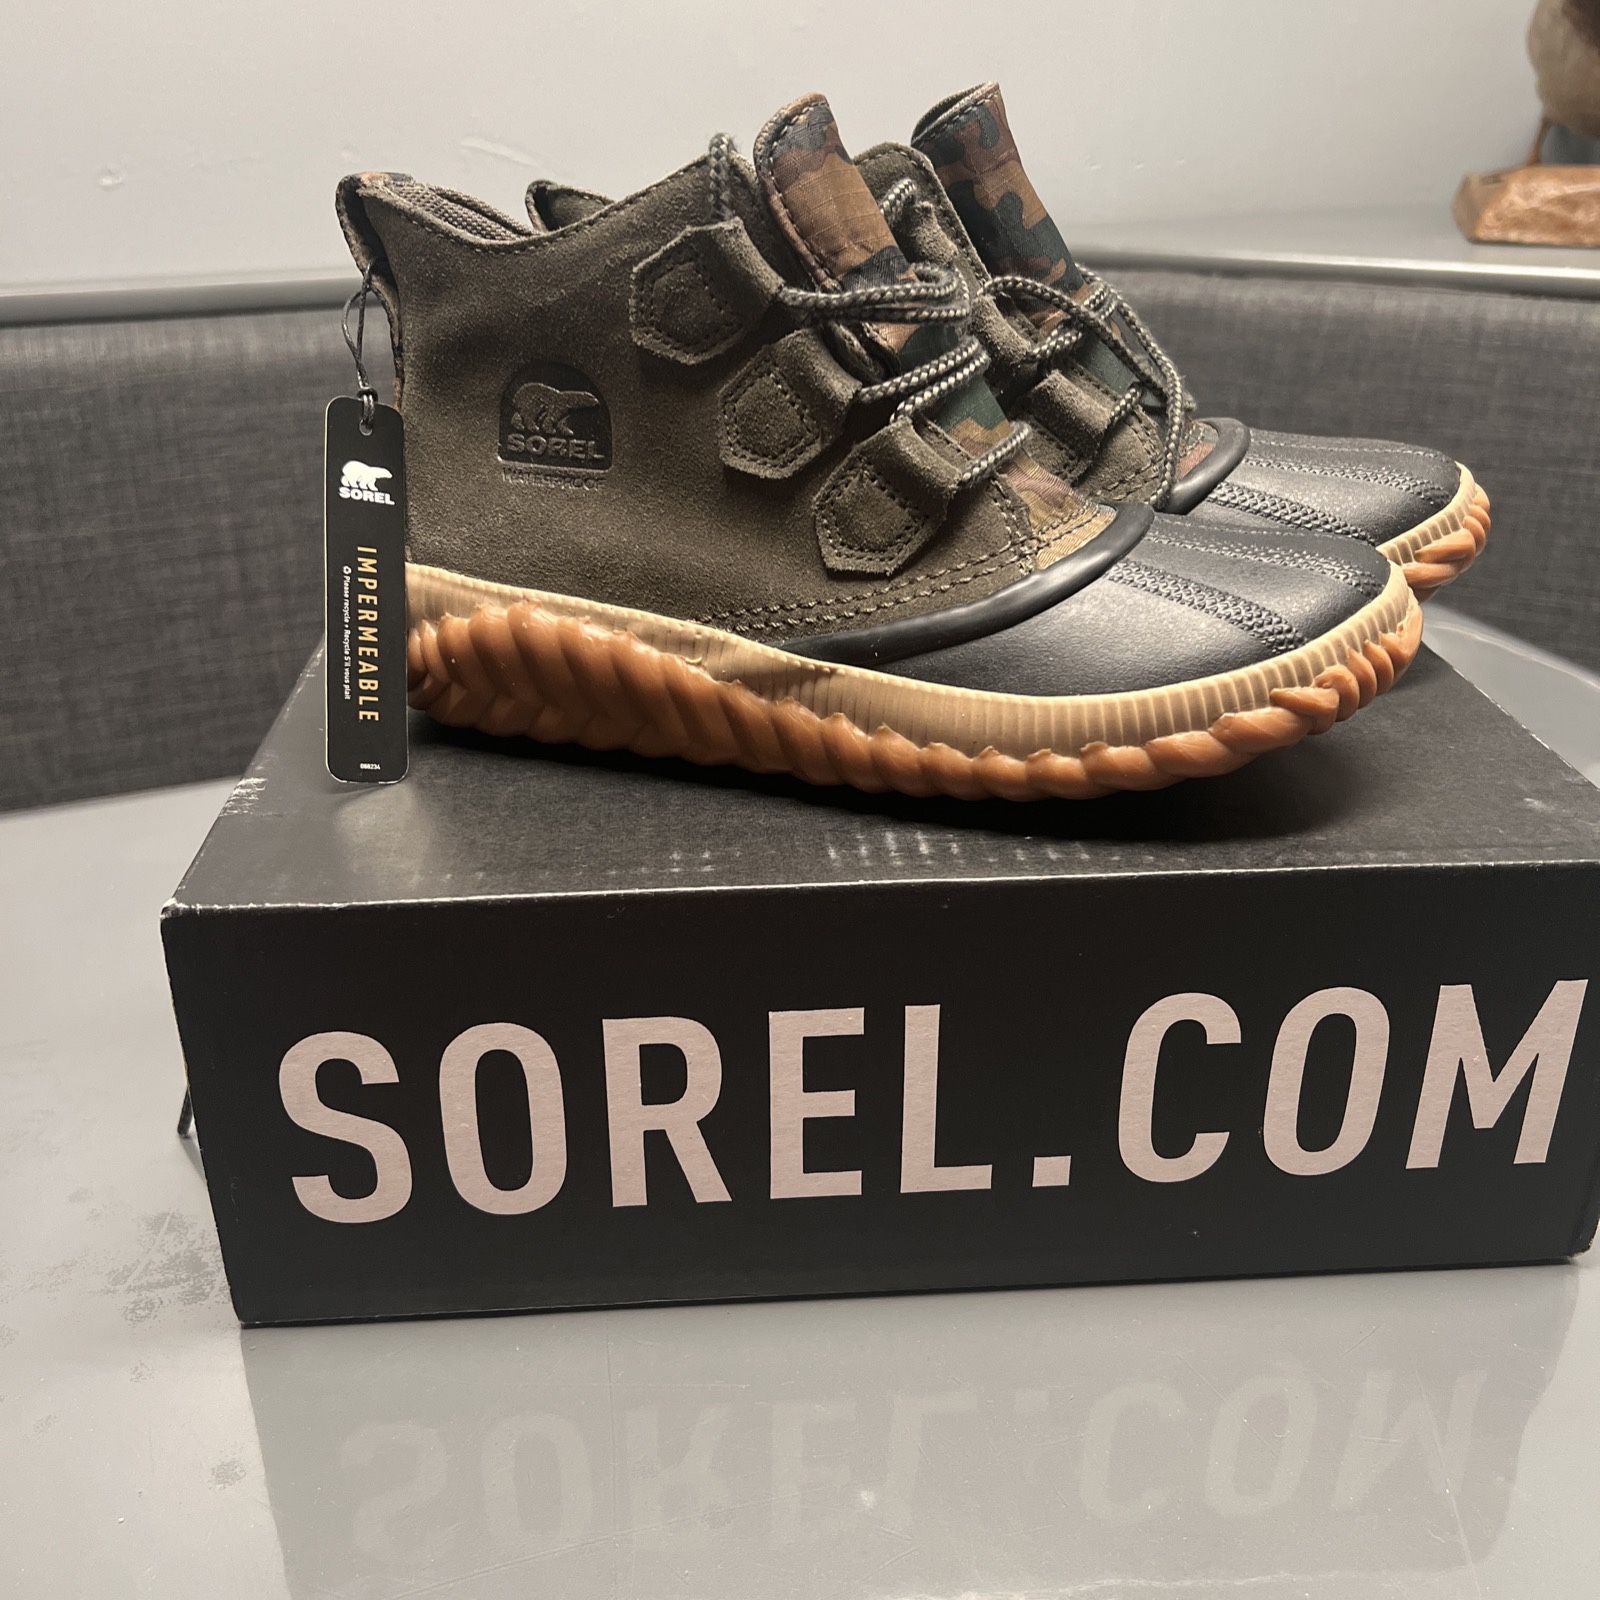 Sorel Womens Out N About Plus Sz 5,5Waterproof Camo Winter Boots Alpine Tundra